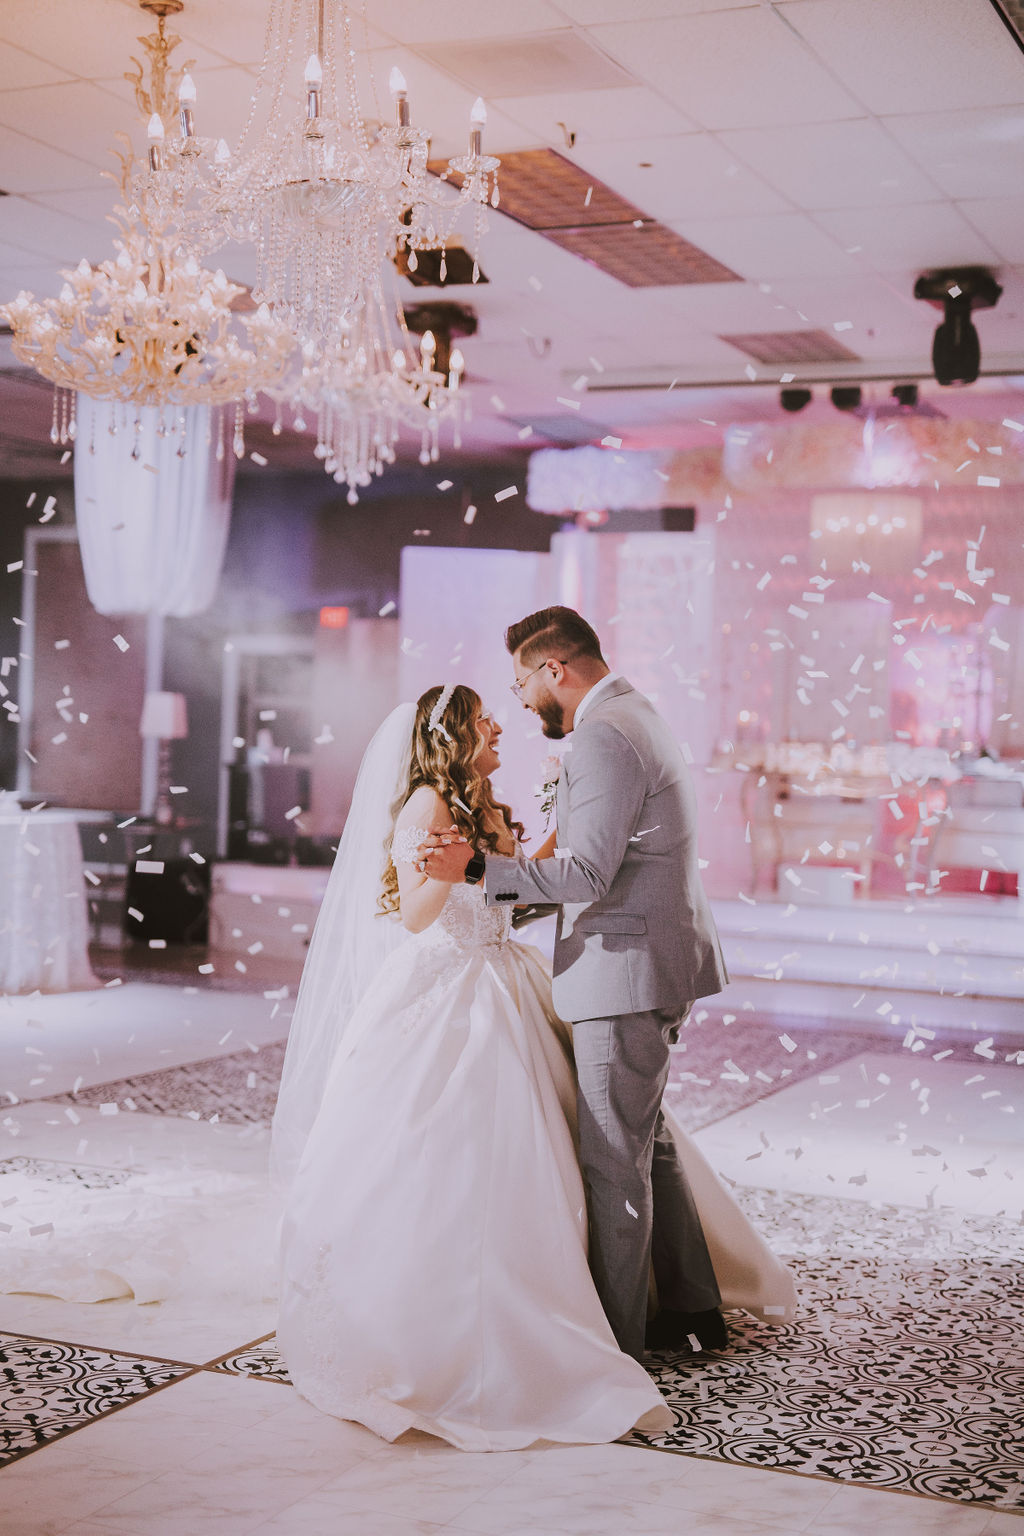 Romantic First Dance with confetti falling at Chandelier Banquet Hall in Las Vegas, Nevada